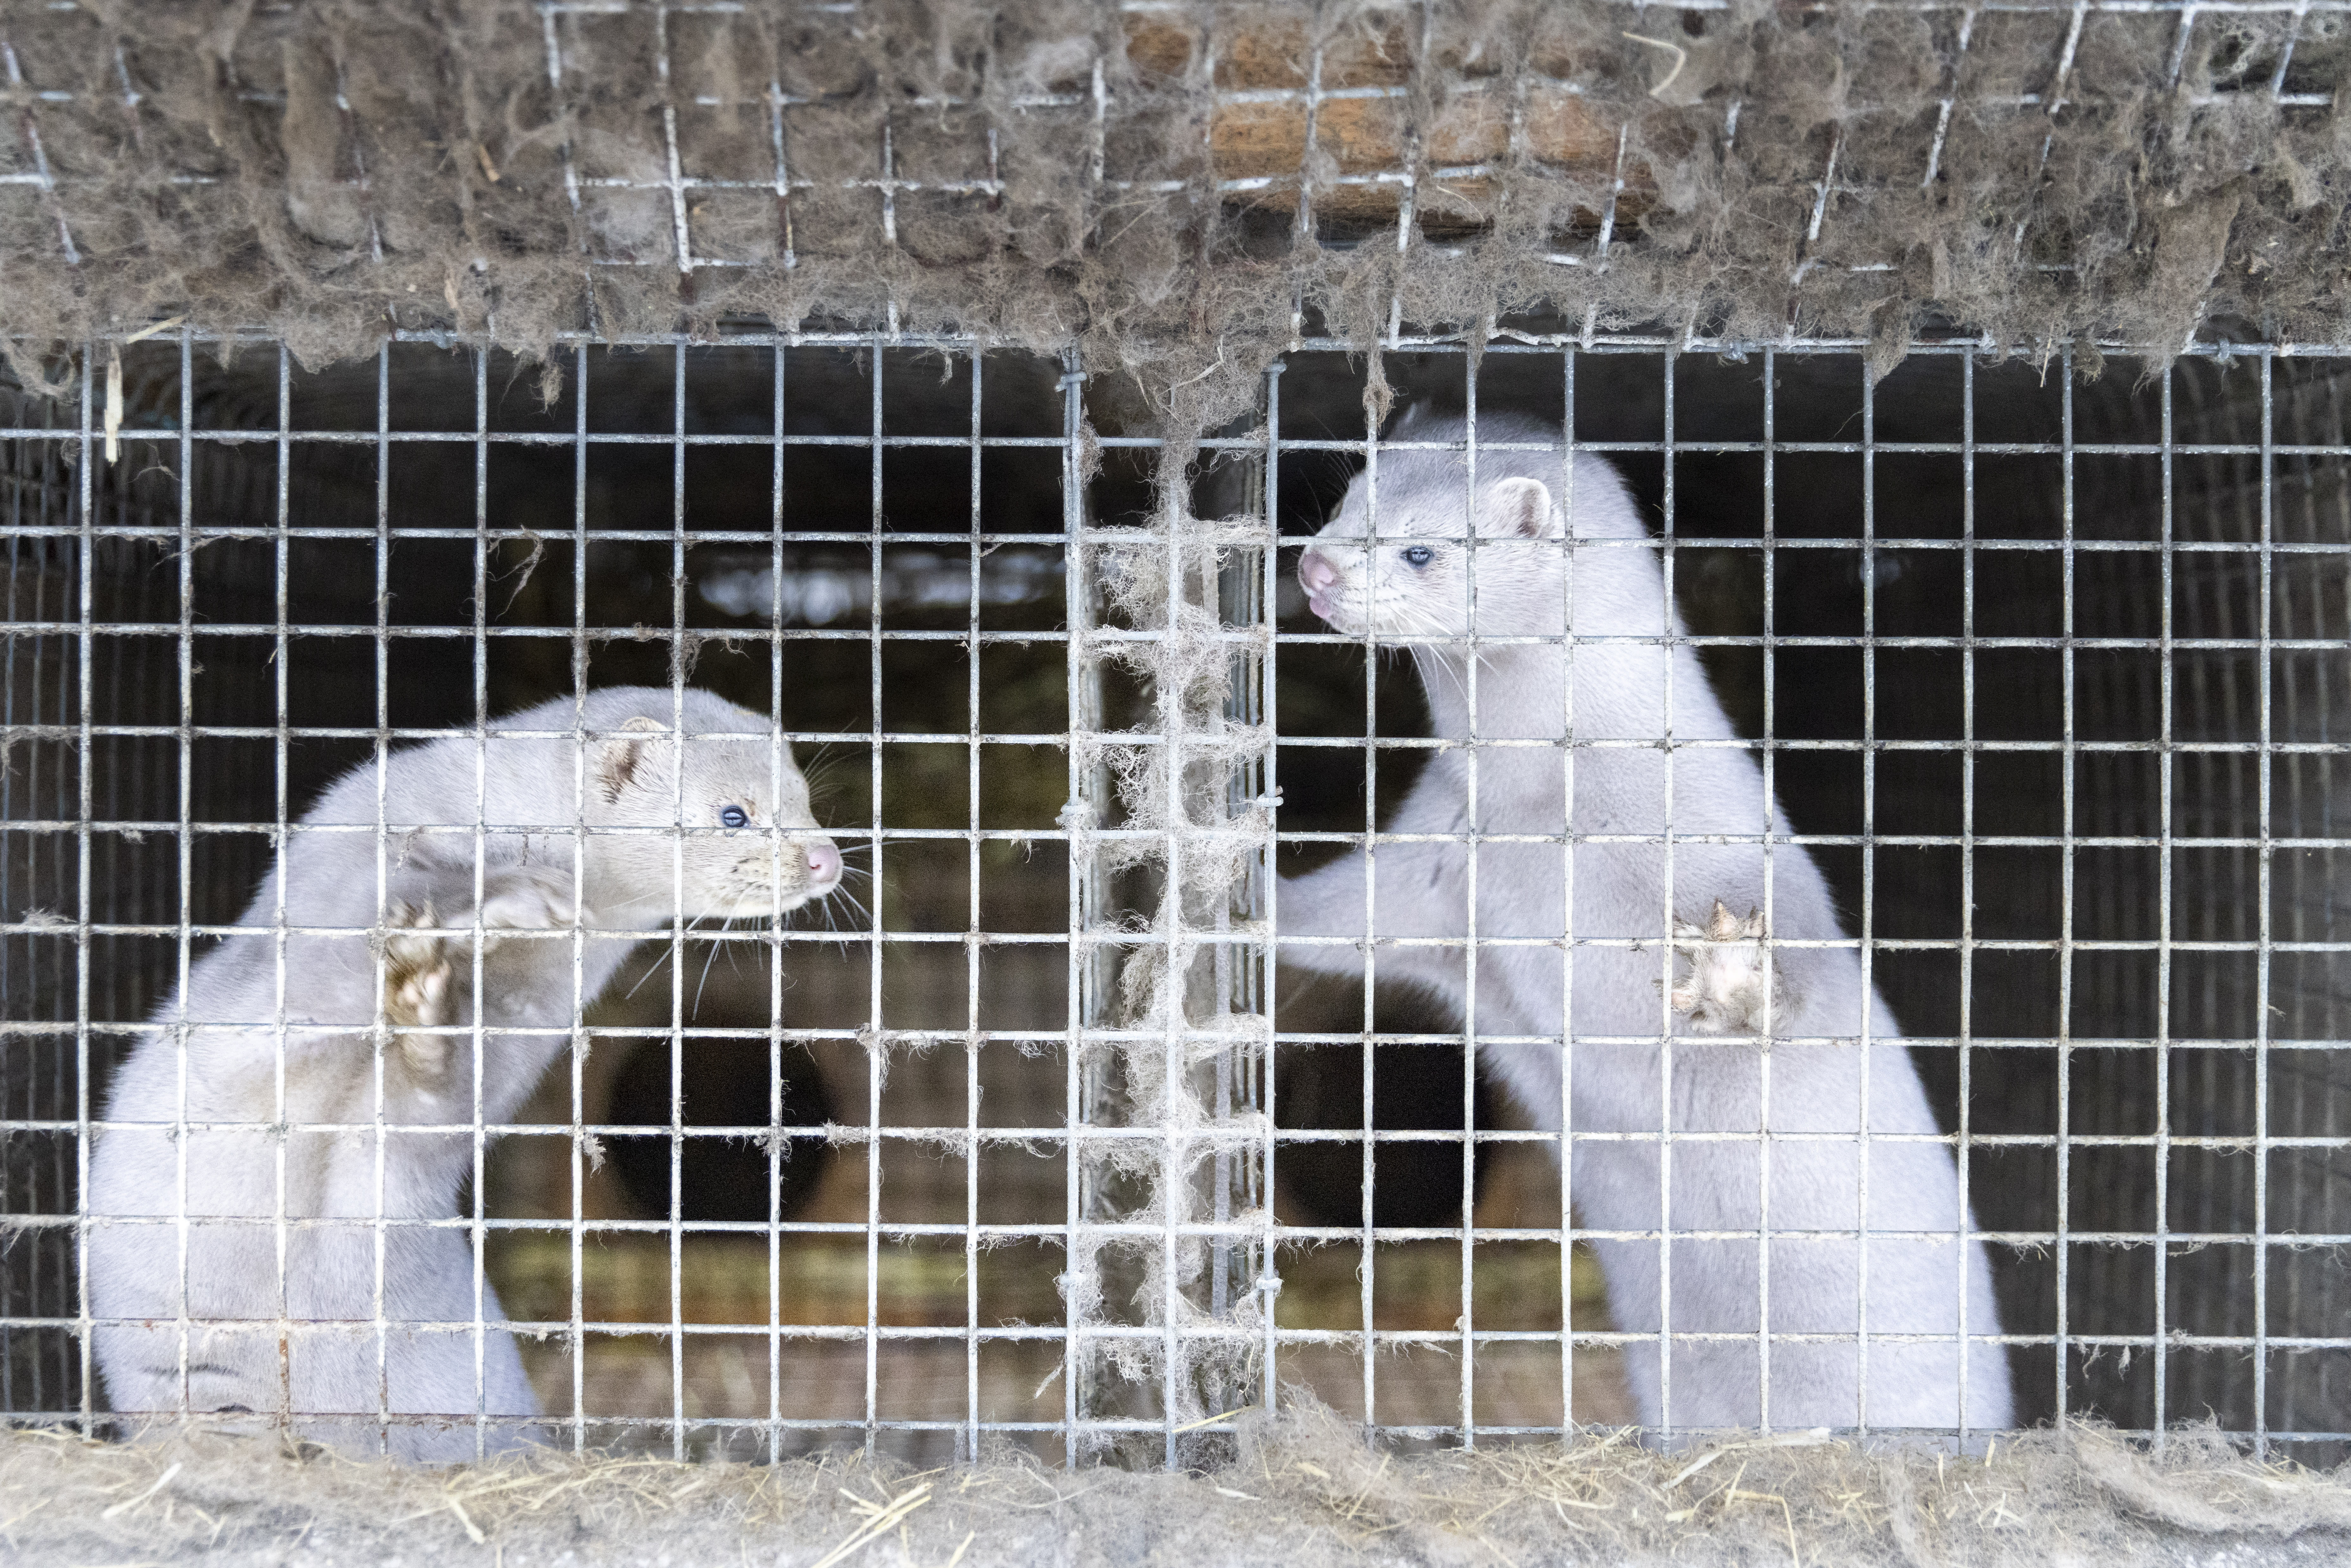 The Swedish People’s Party voted against the ban on fur farms